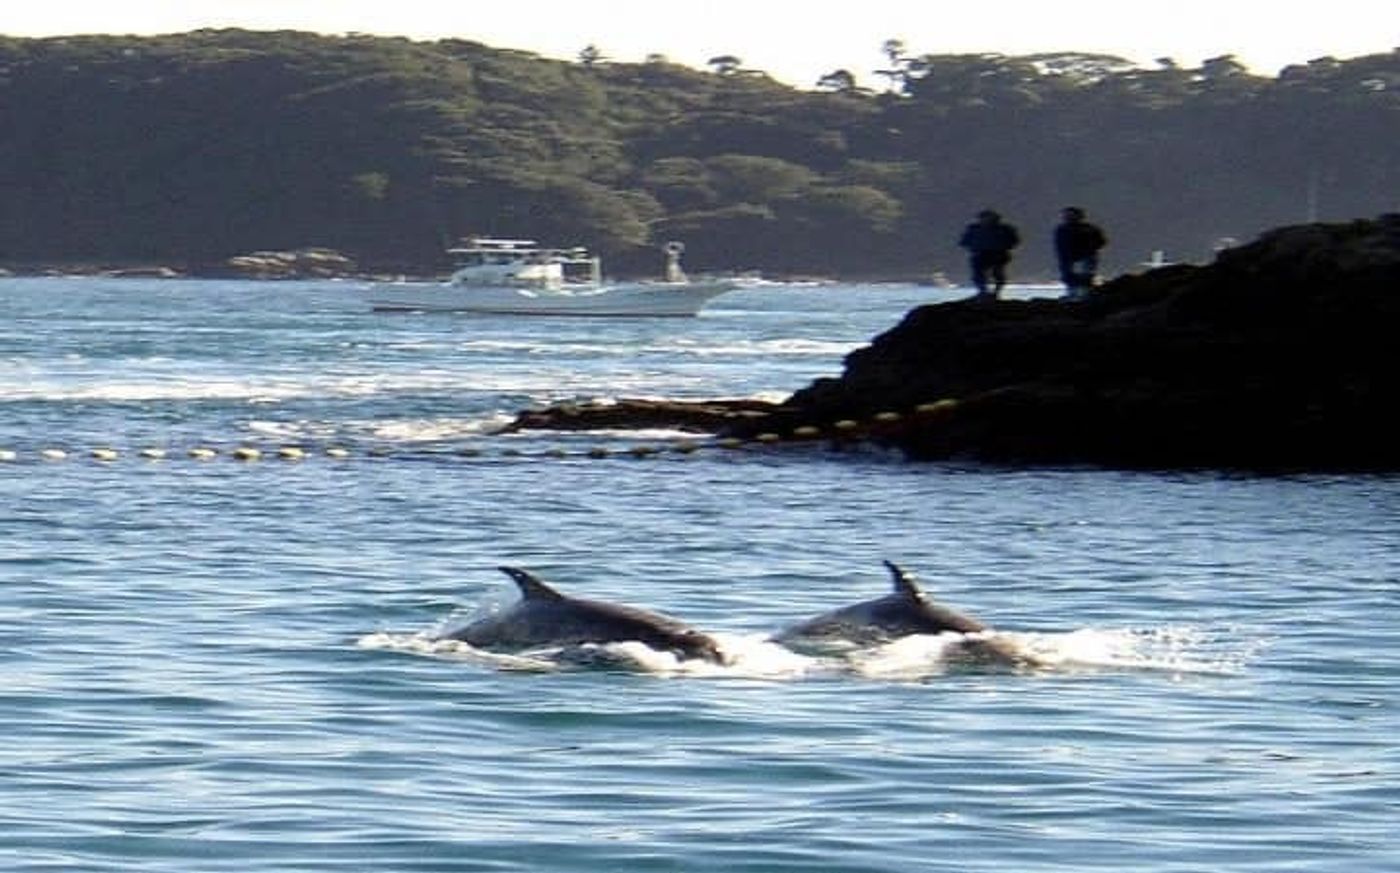 Dolphins have reportedly escaped from a controversial holding site in Japan.